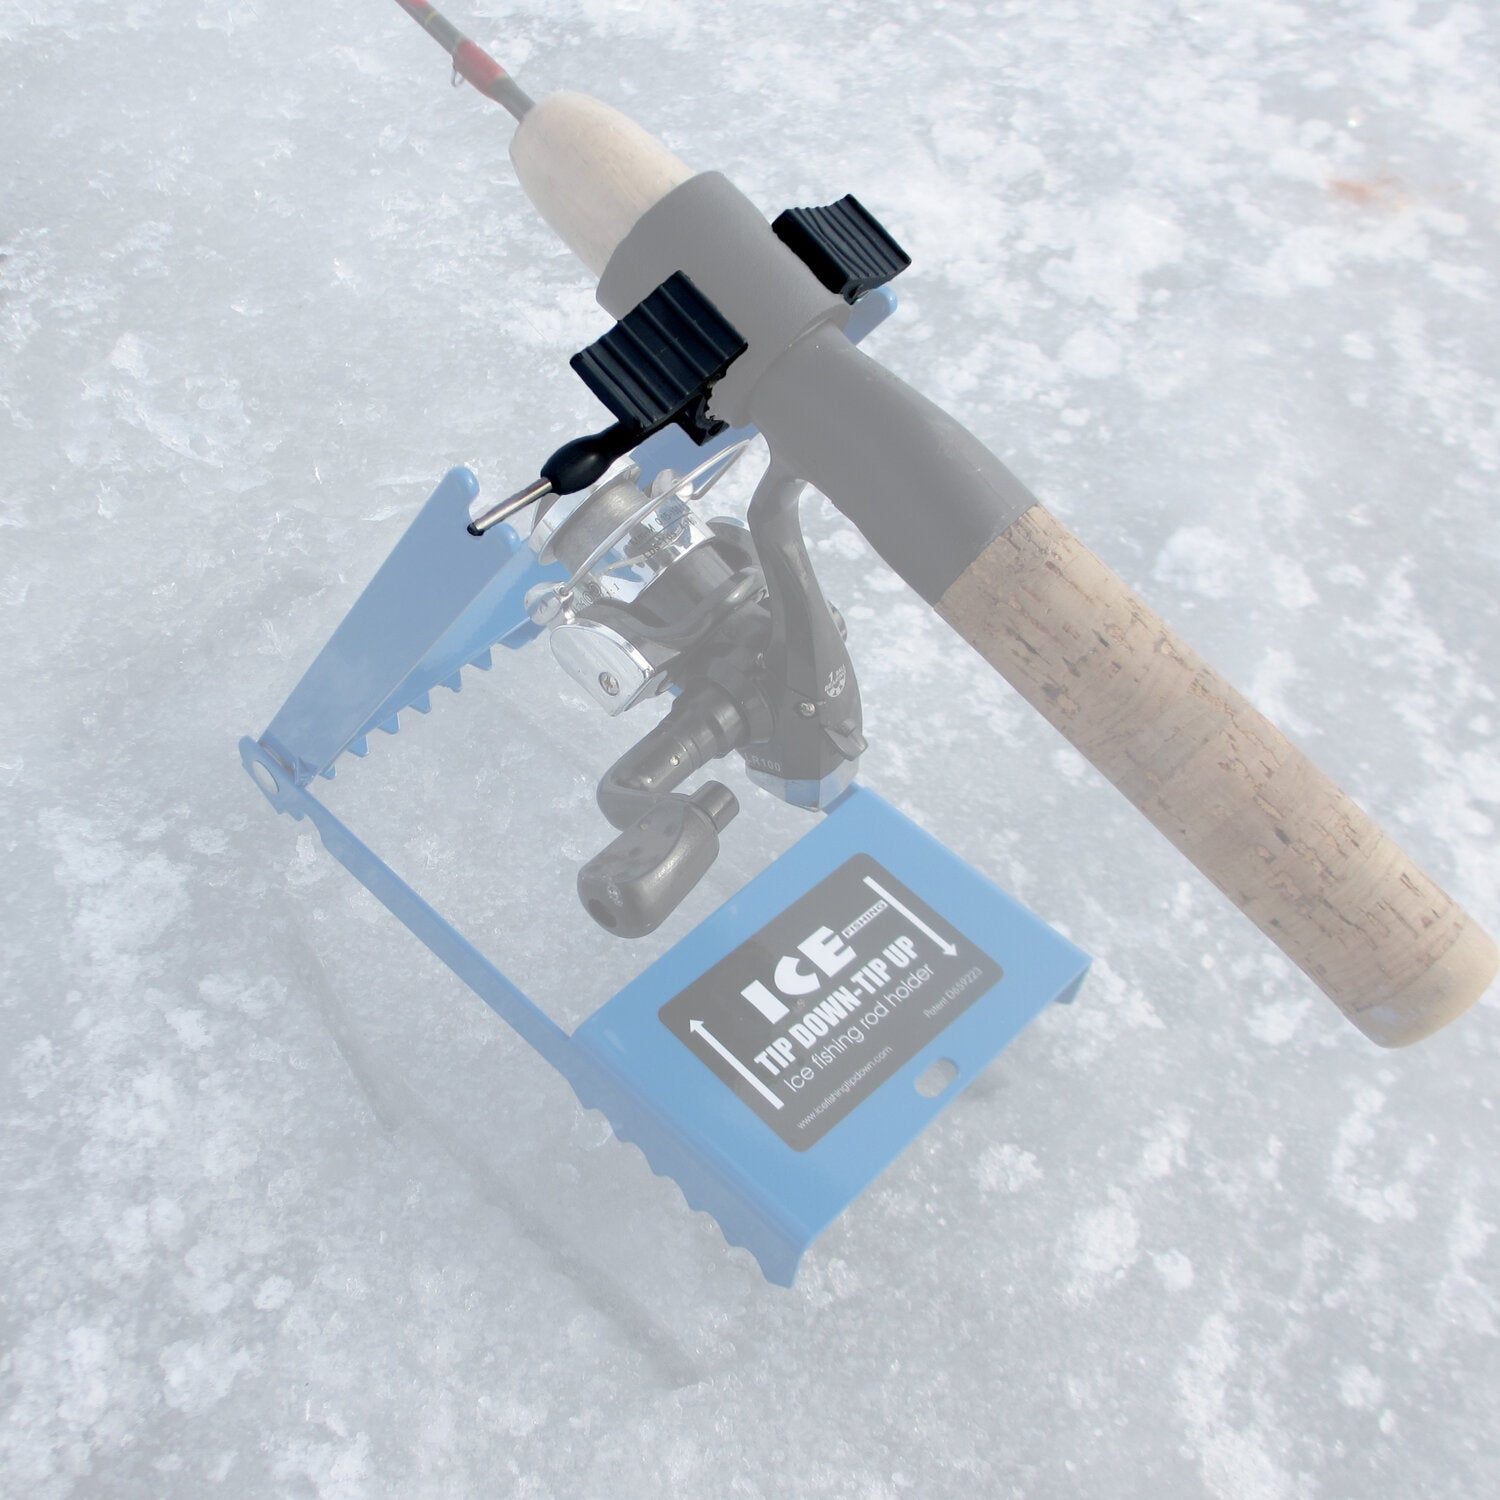 BIG RED ICE Fishing Tip Down-Tip Up Rod Pole Holder for larger reel heavier  line $32.95 - PicClick